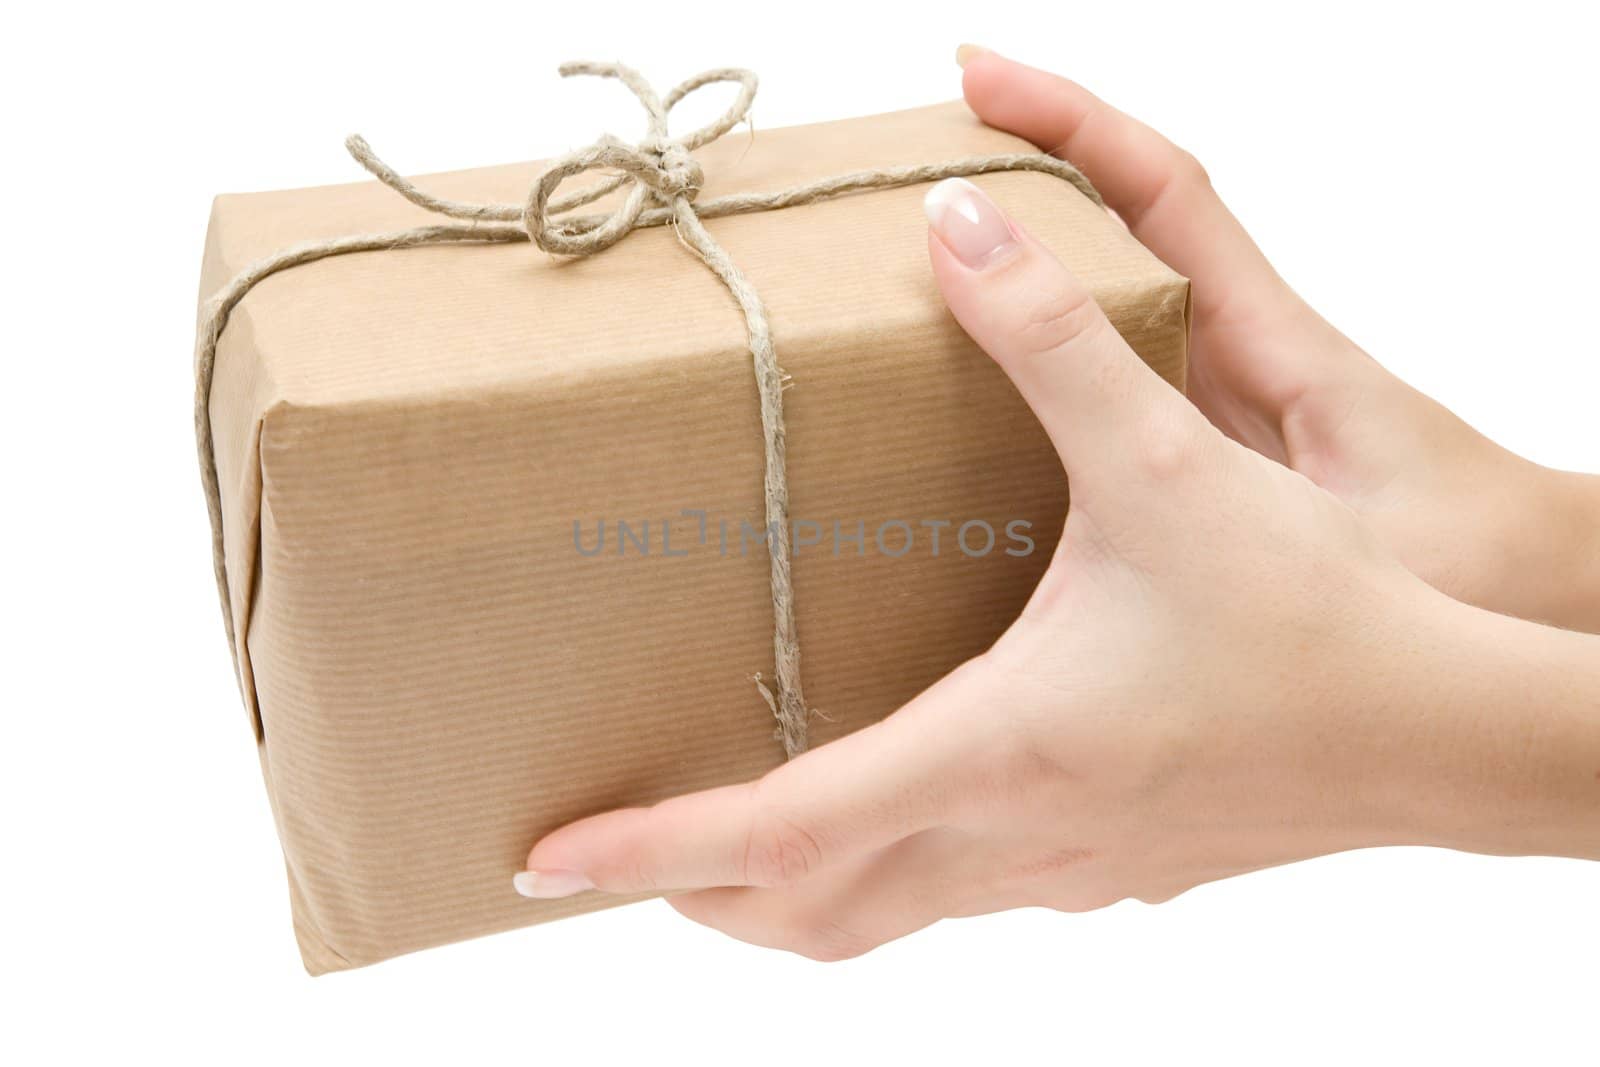 Female hands holding a brown parcel. Isolated on a white background.